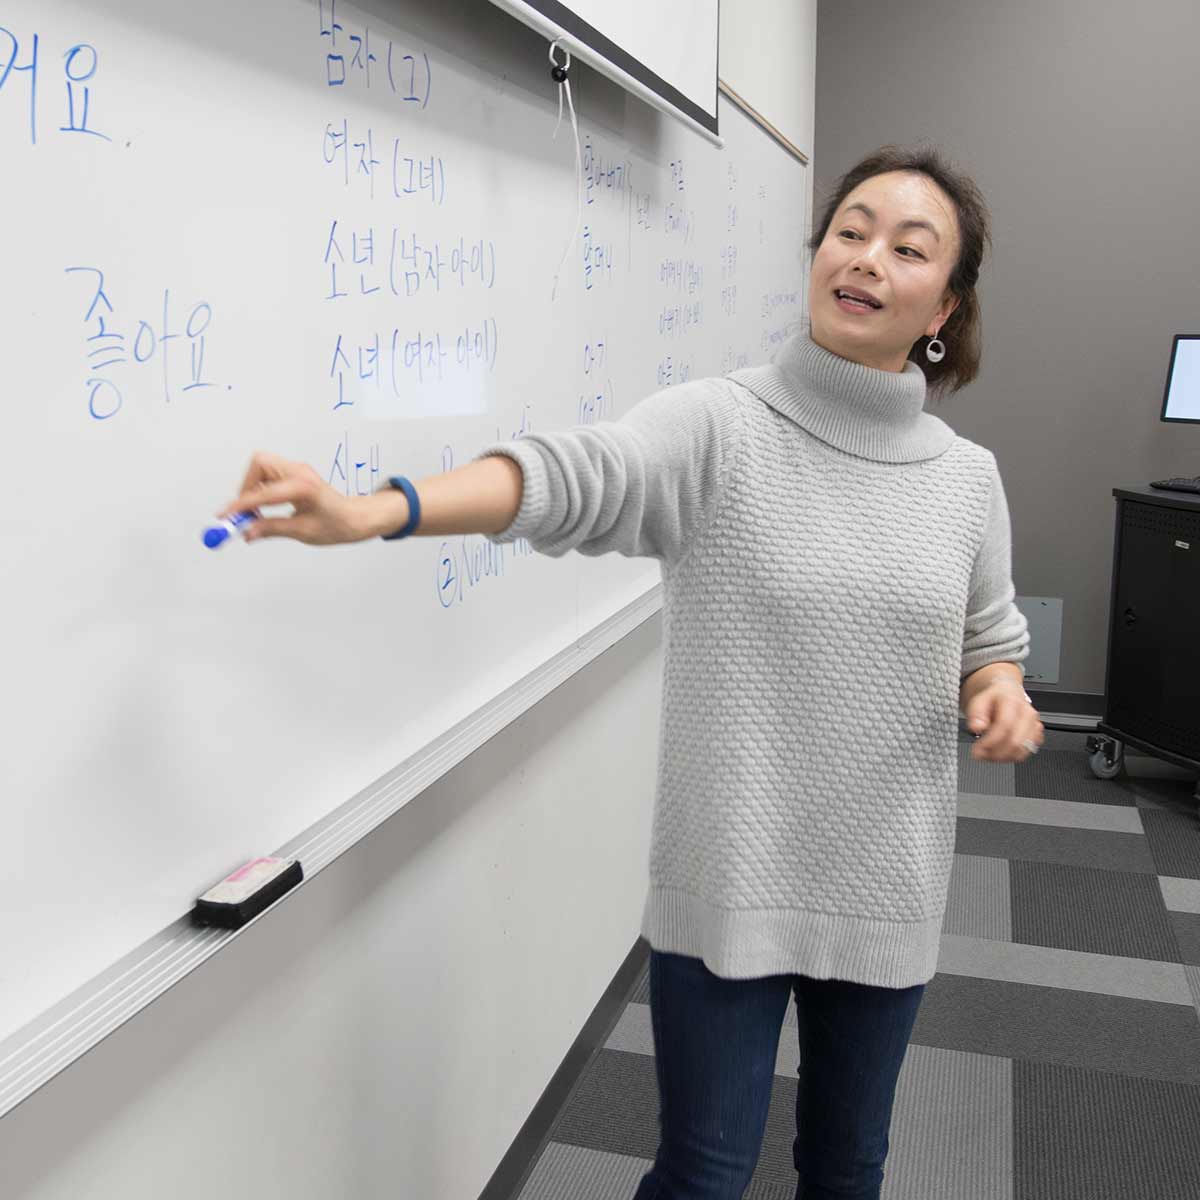 A language teacher holds up a blue marker to point to Chinese words and letters on a dry erase board during class.